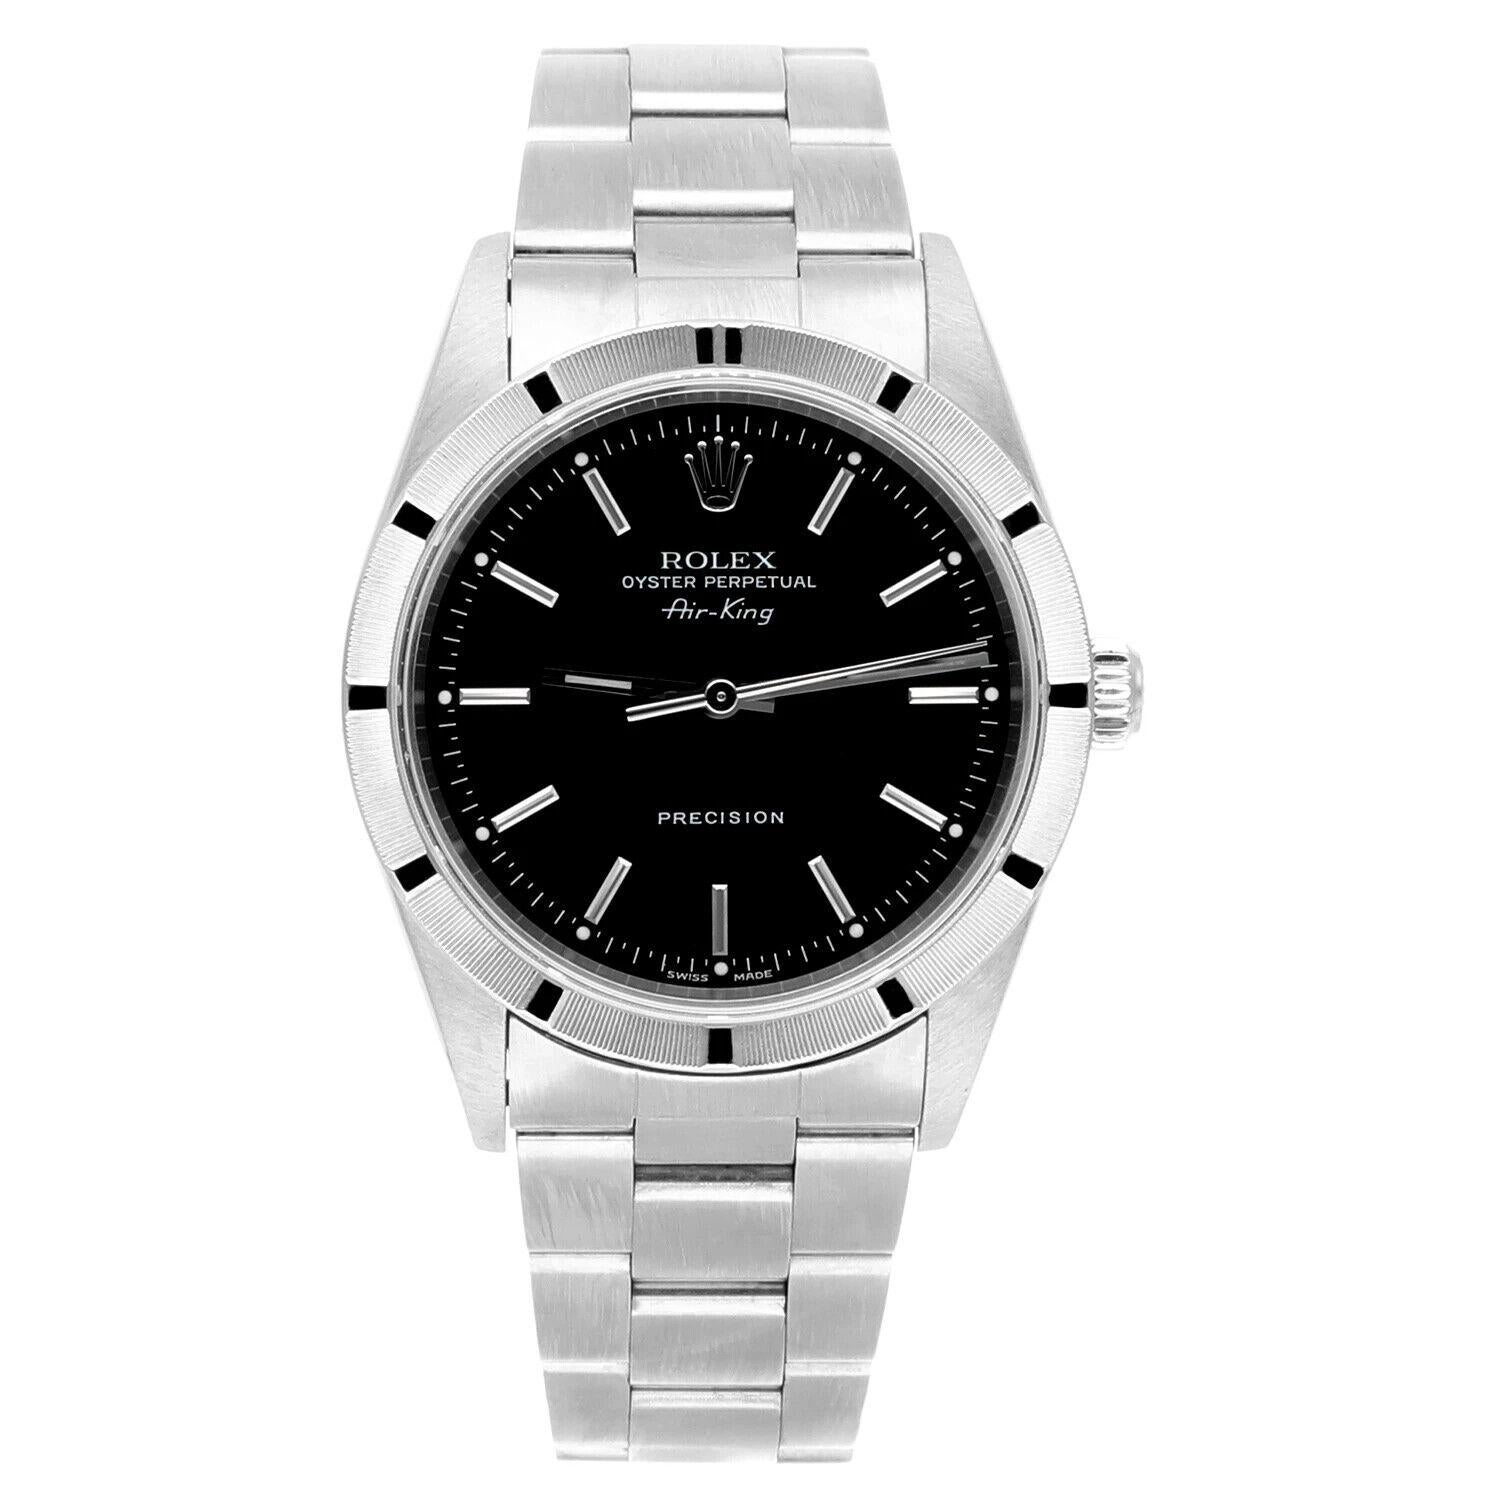 Rolex Air King 34mm Stainless Steel Watch Black Dial Engine Turned Bezel Unisex Watch 14010, Circa 2001 Y series.
This watch has been professionally polished, serviced and is in excellent overall condition. There are absolutely no visible scratches